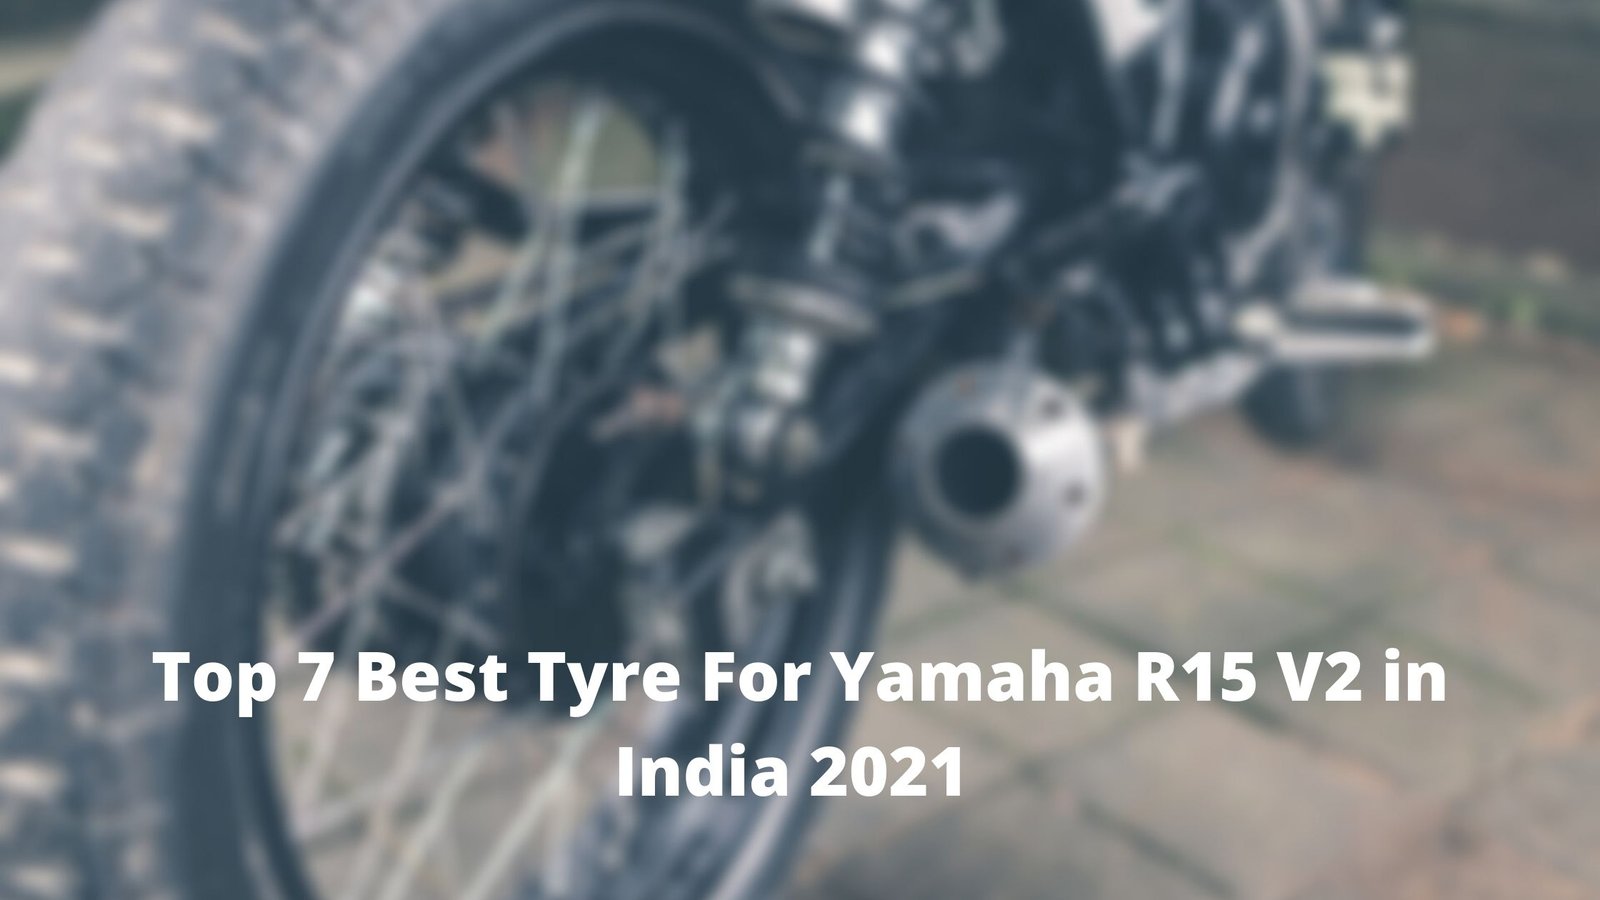 Now Top 7 Best Tyre For Yamaha R15 V2 in India 2021 [Bengali]